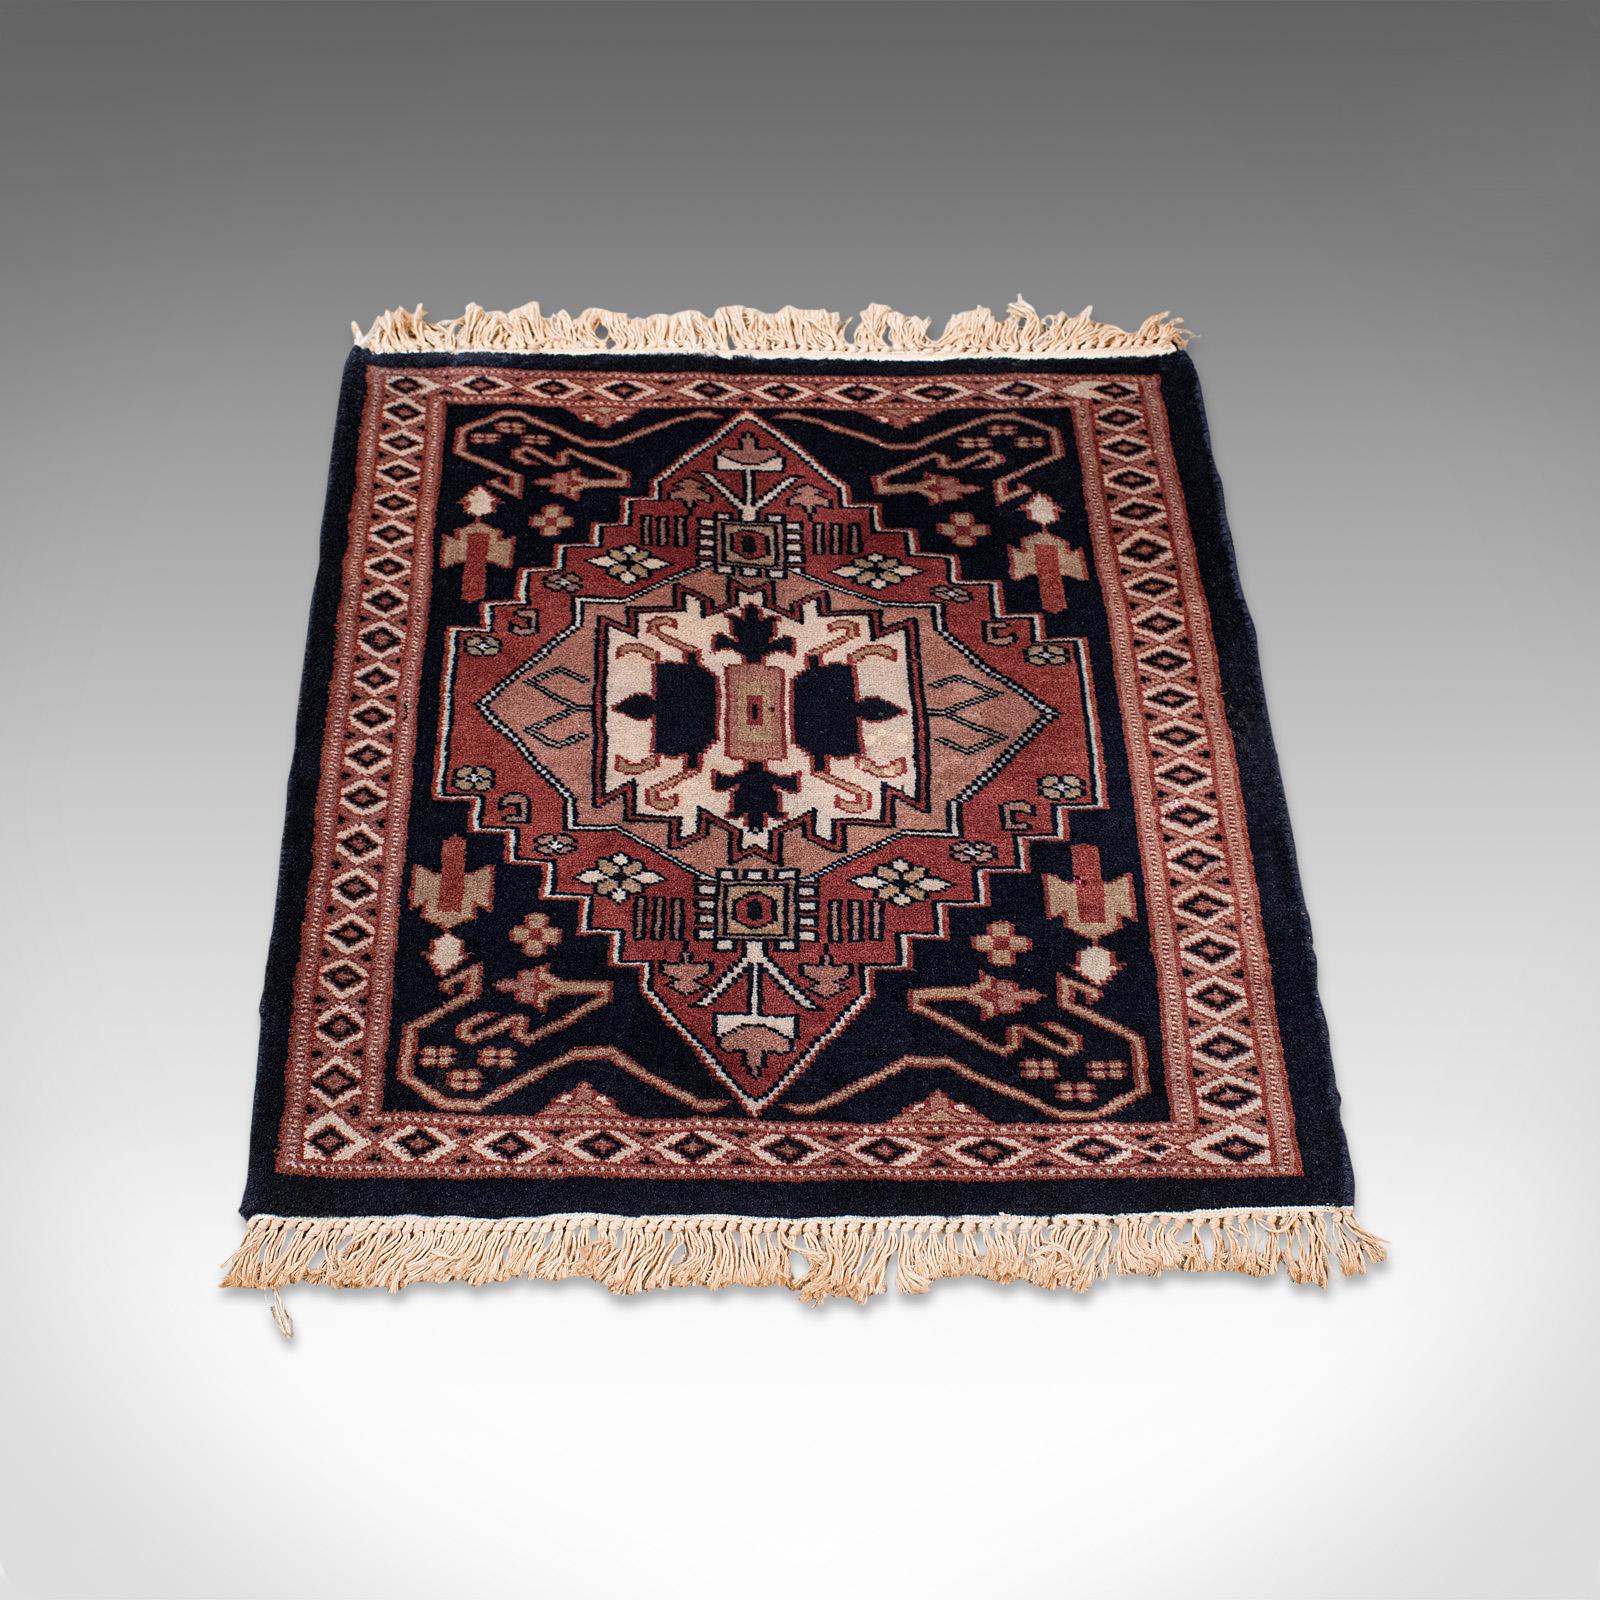 This is a small vintage hallway rug. A Persian, woollen reception hall or prayer mat, dating to the late 20th century, circa 1980.

Wonderfully contrasted palette of colors
Displays a desirable aged patina and in overall clean order
Dark blue